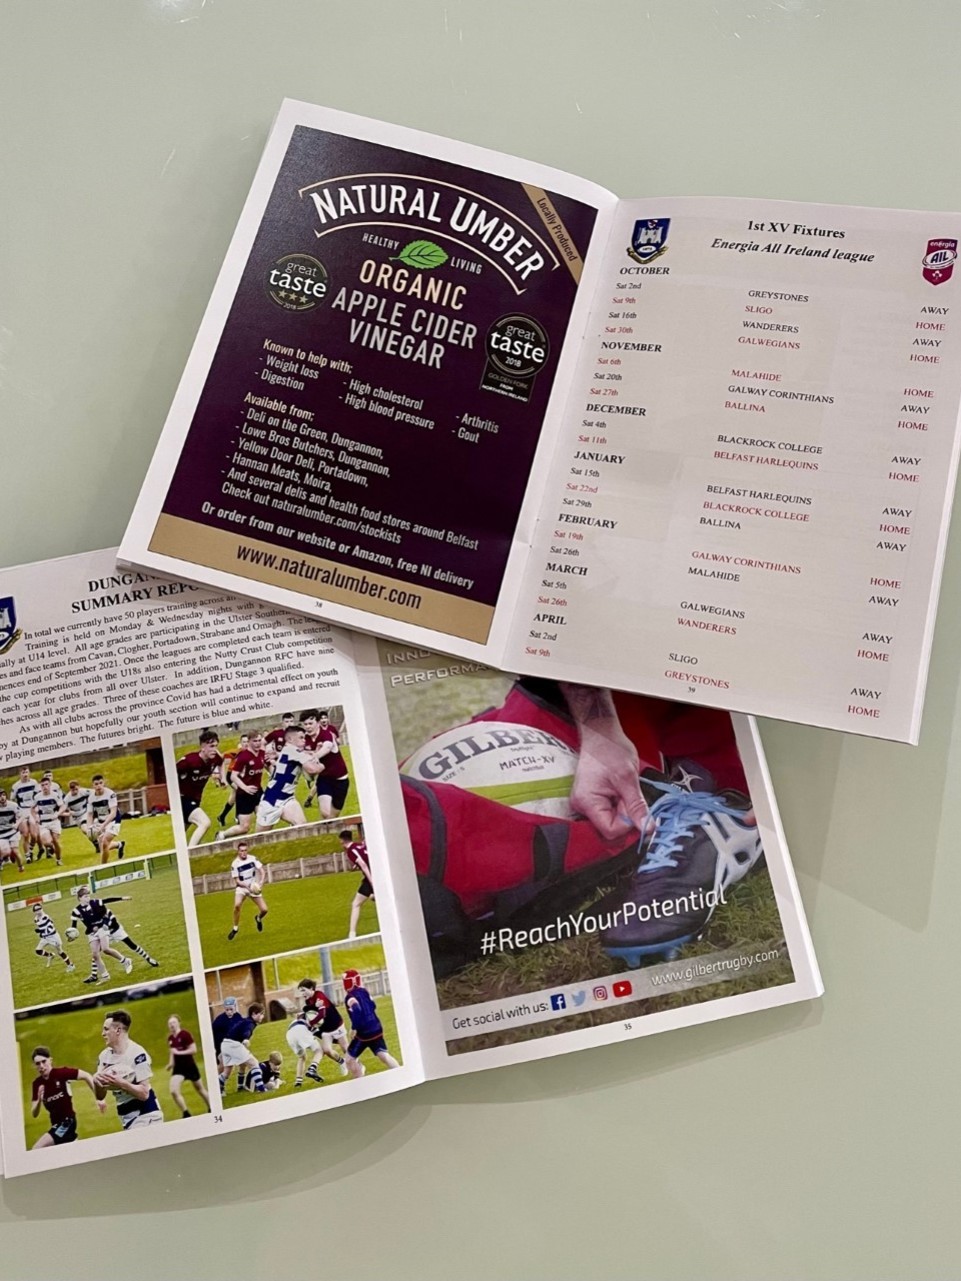 Club Fixtures Cards printed by Gillprint Ltd, Dungannon, Northern Ireland